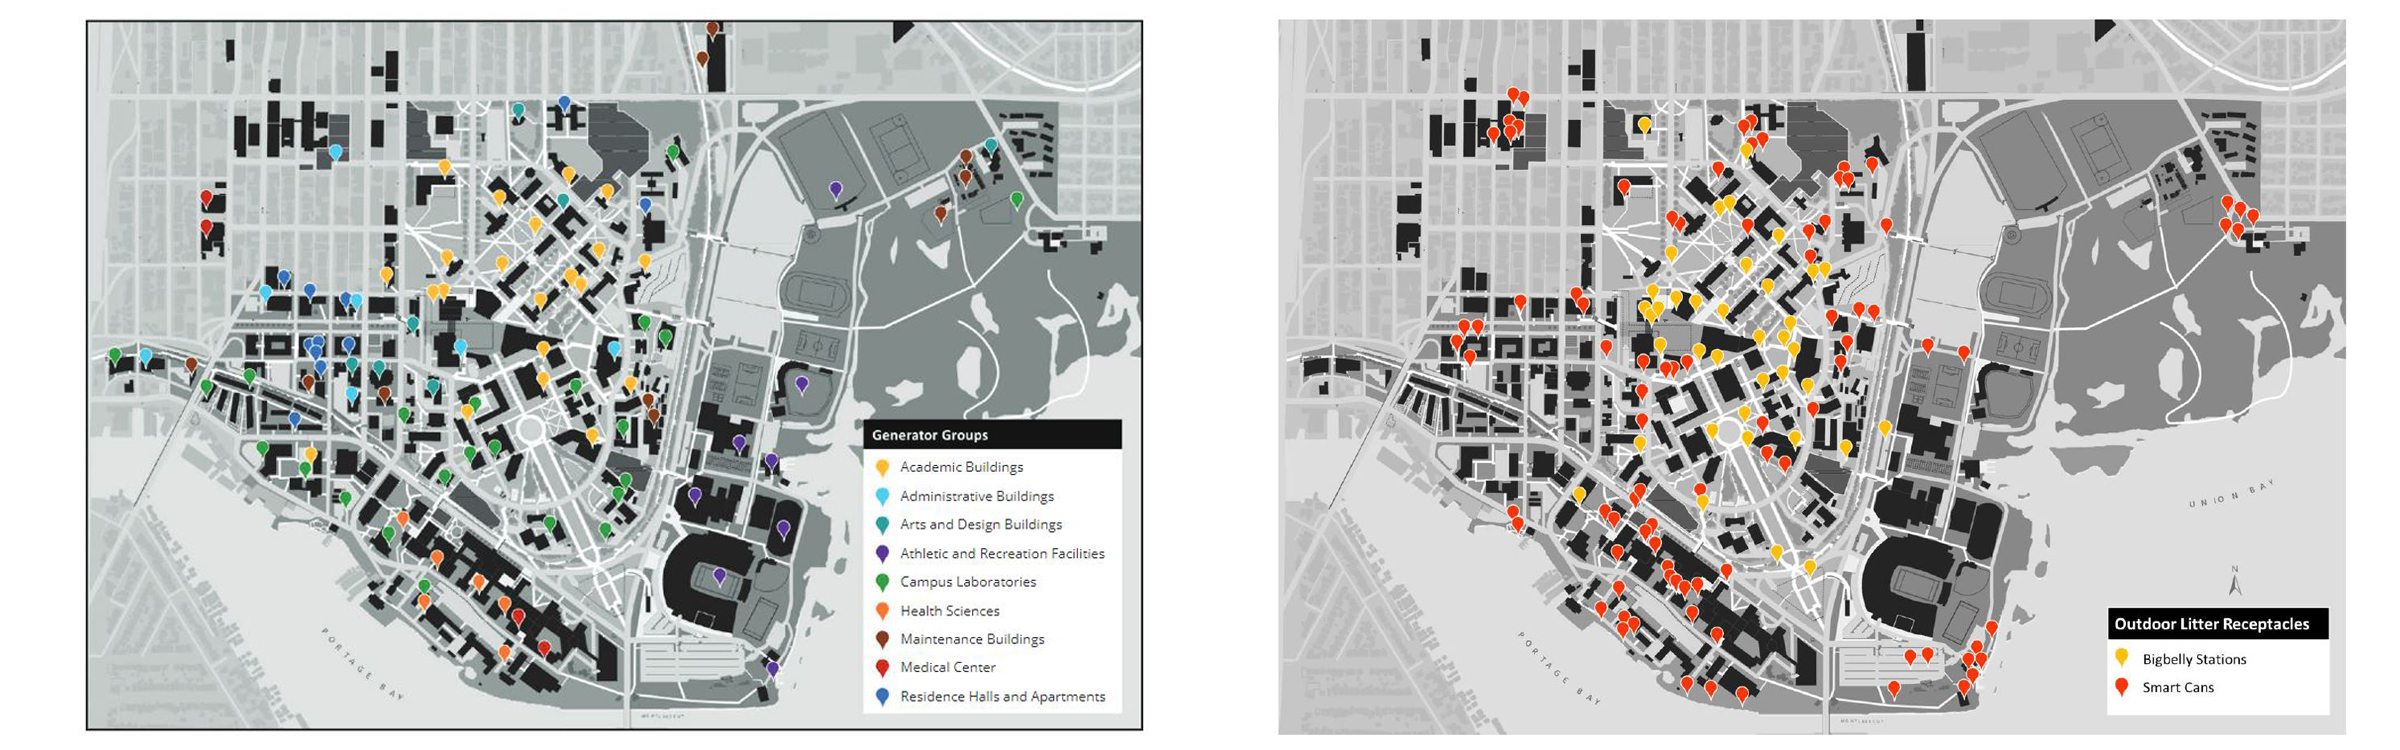 Left: map indicating what generator groups were part of the study. Right: a graph illustrates the annual tons of waste disposed of on UW's campus.